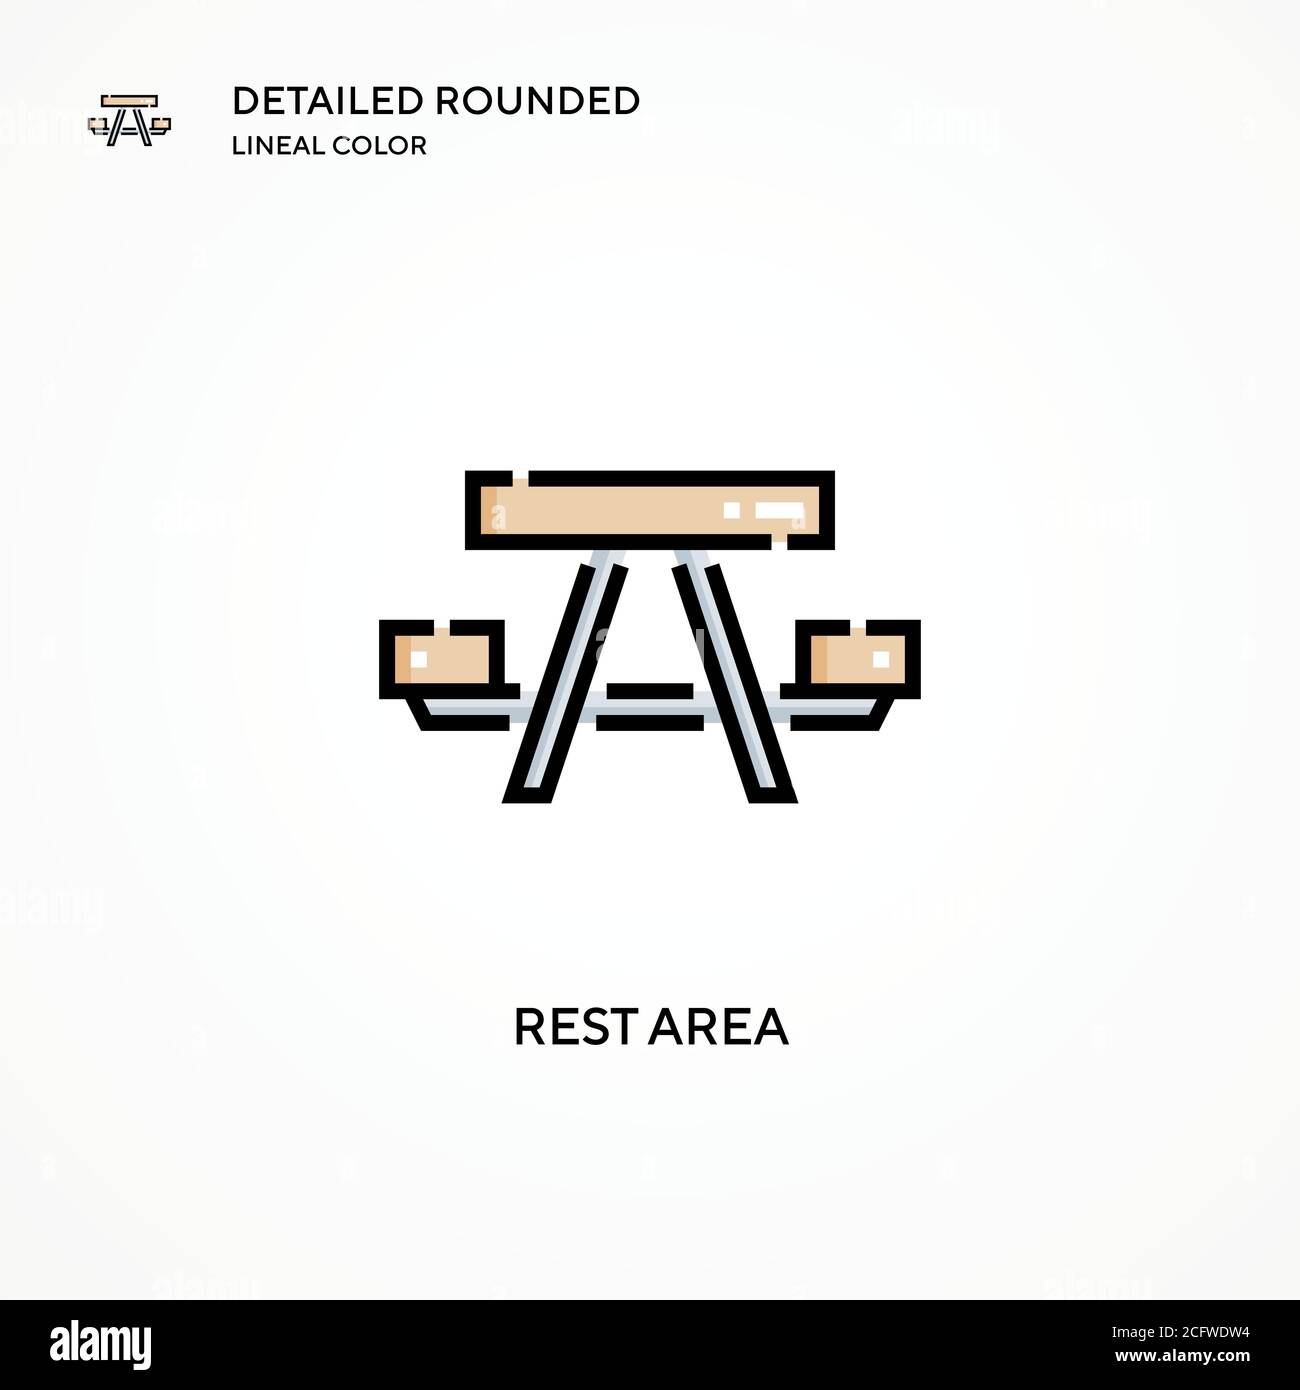 Rest area vector icon. Modern vector illustration concepts. Easy to edit and customize. Stock Vector